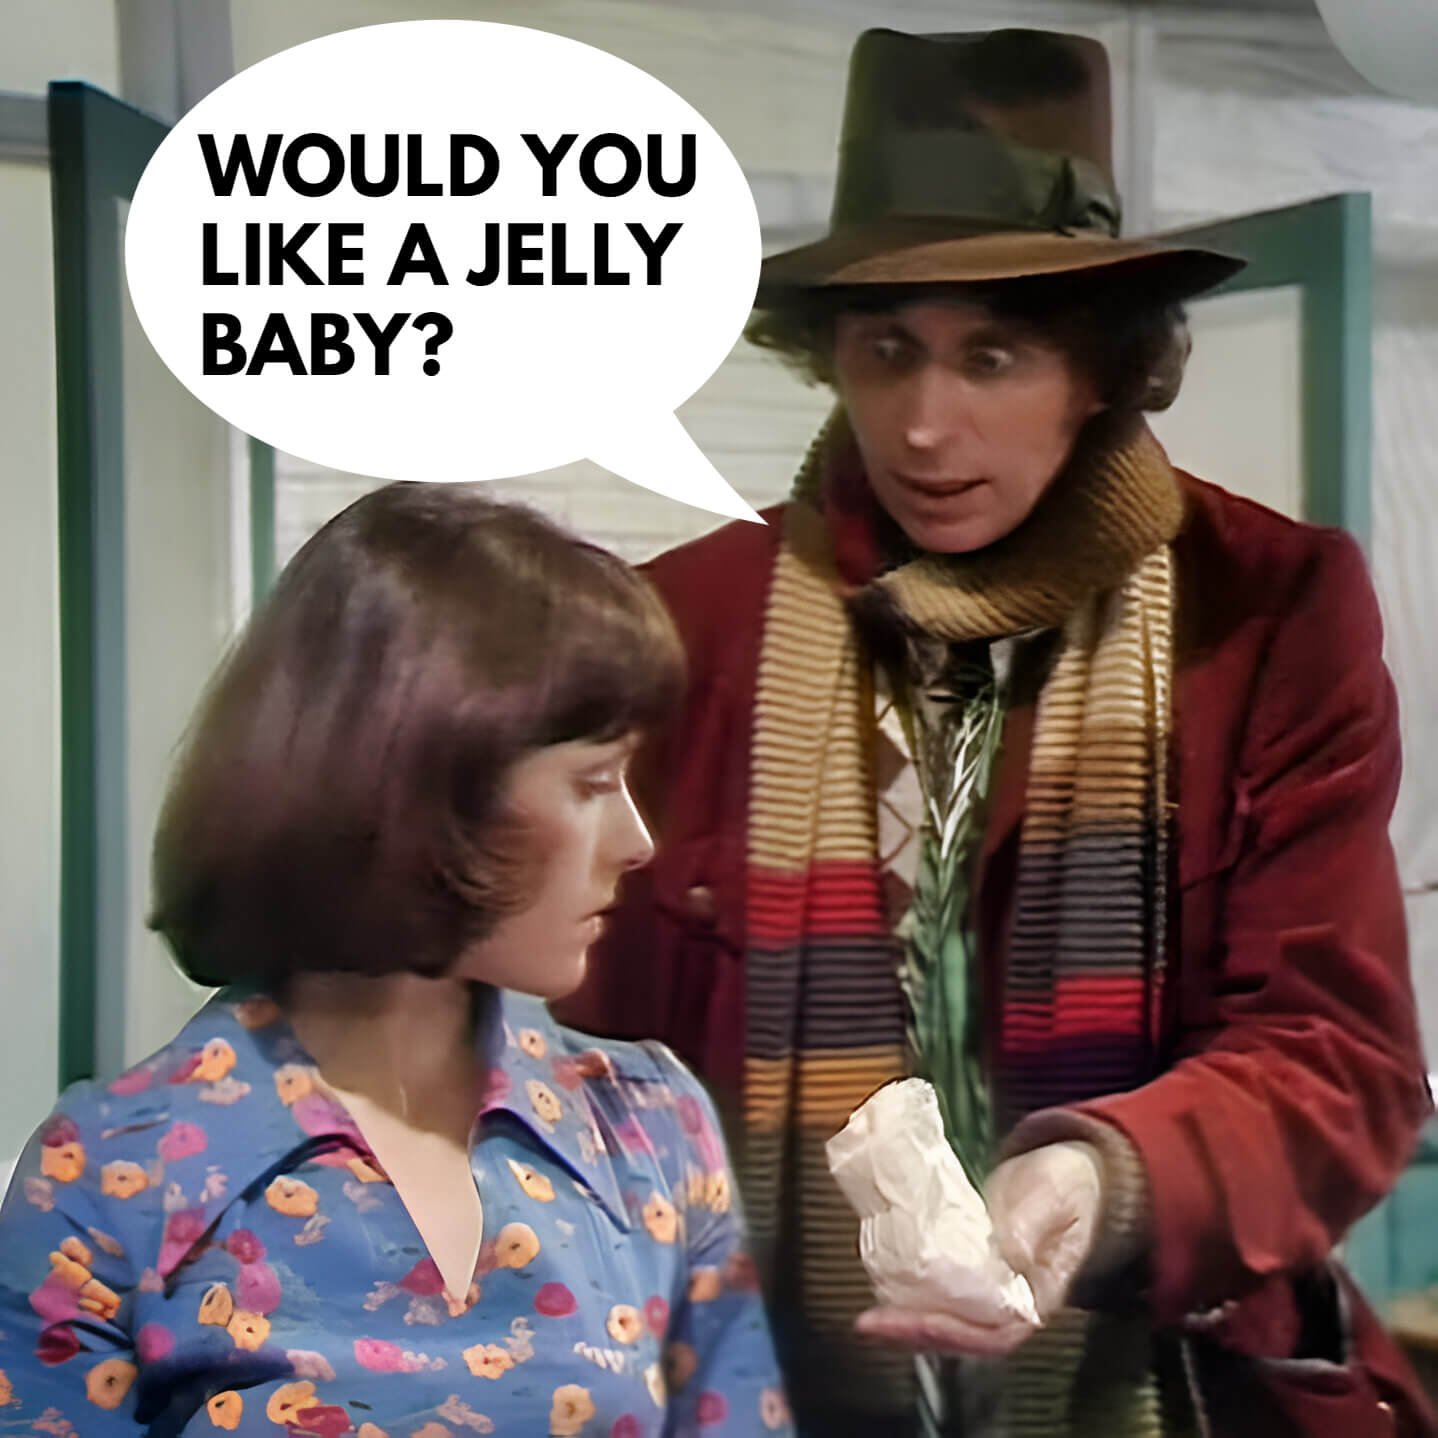 The Fourth Doctor (Tom Baker) offering Sarah Jane a Jelly Baby with speech bubble, would you like a Jelly Baby?